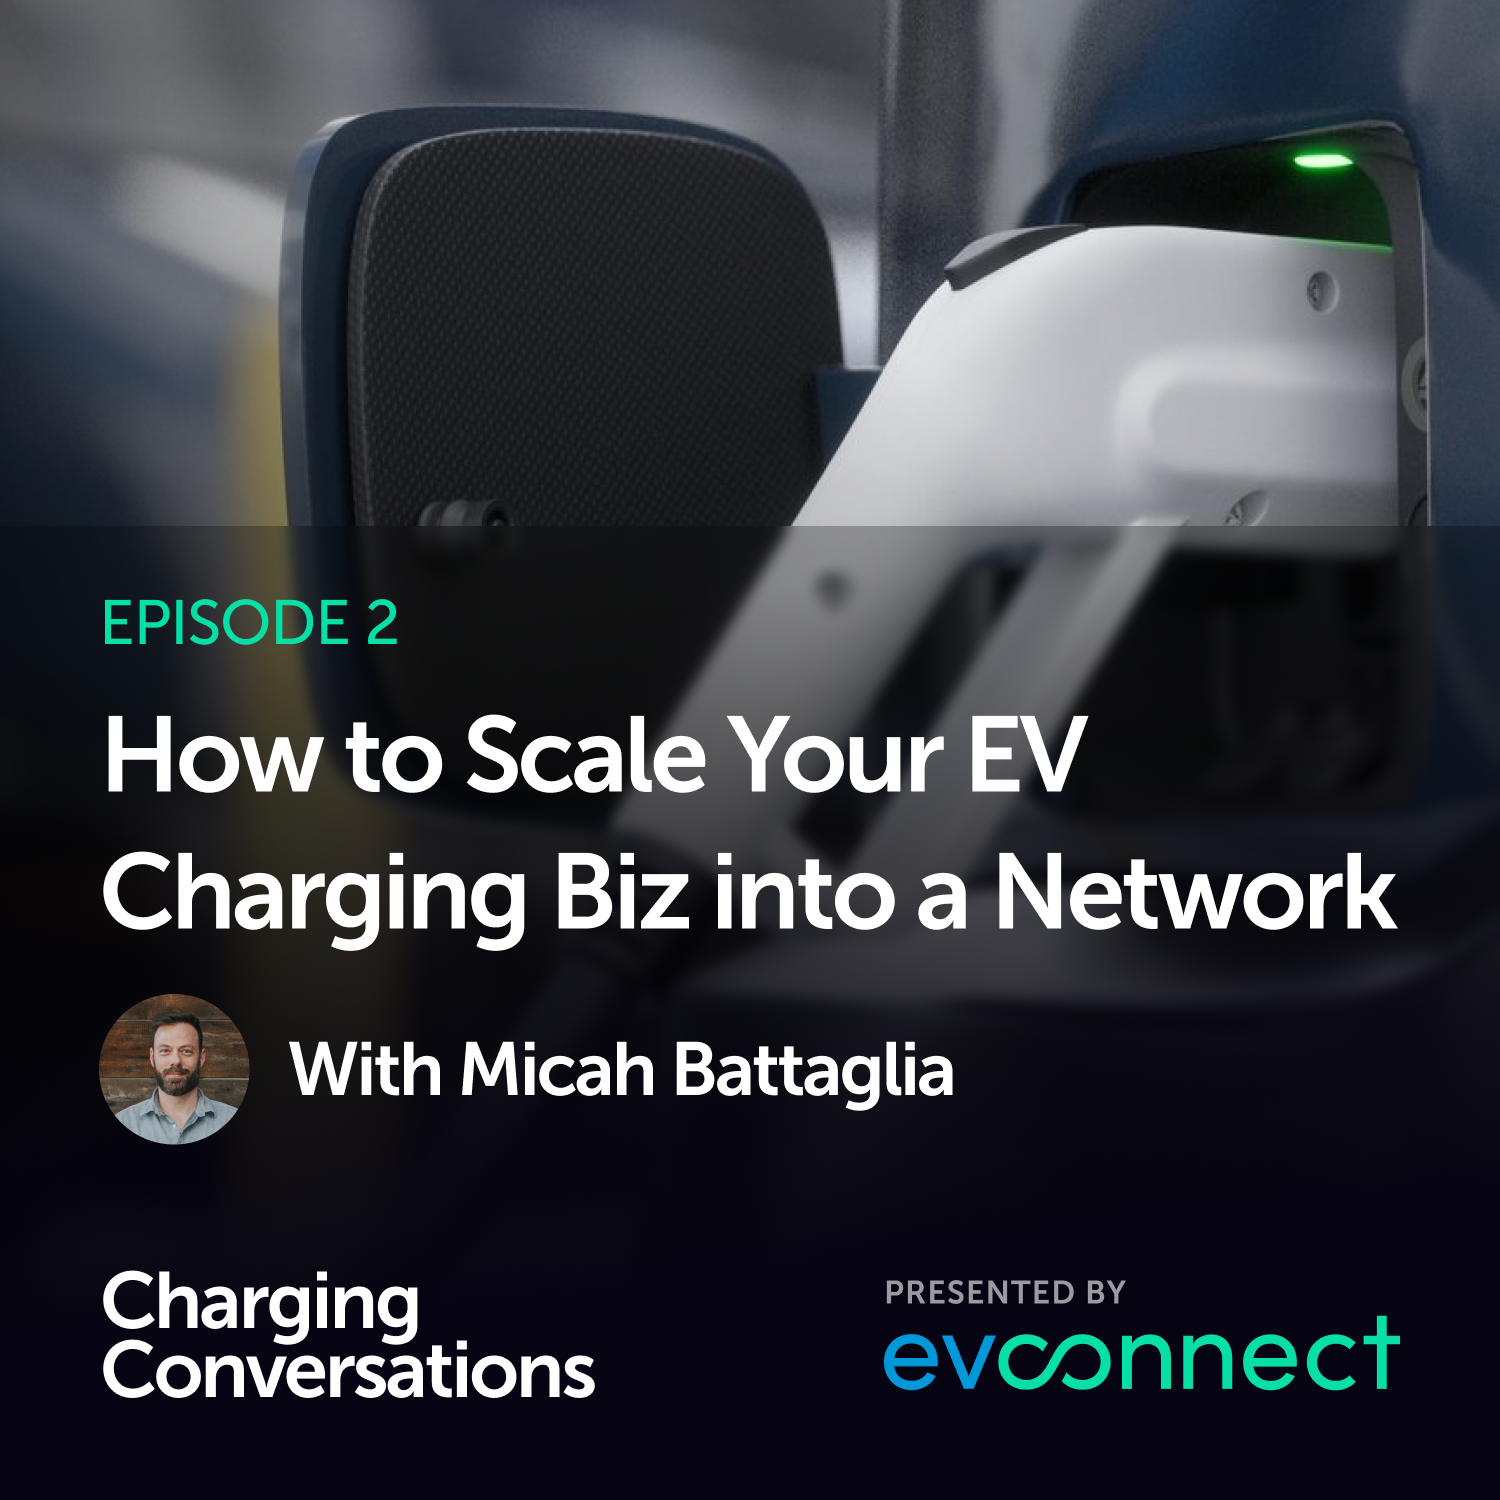 How to Scale Your EV Charging Biz into a Network with Micah Battaglia